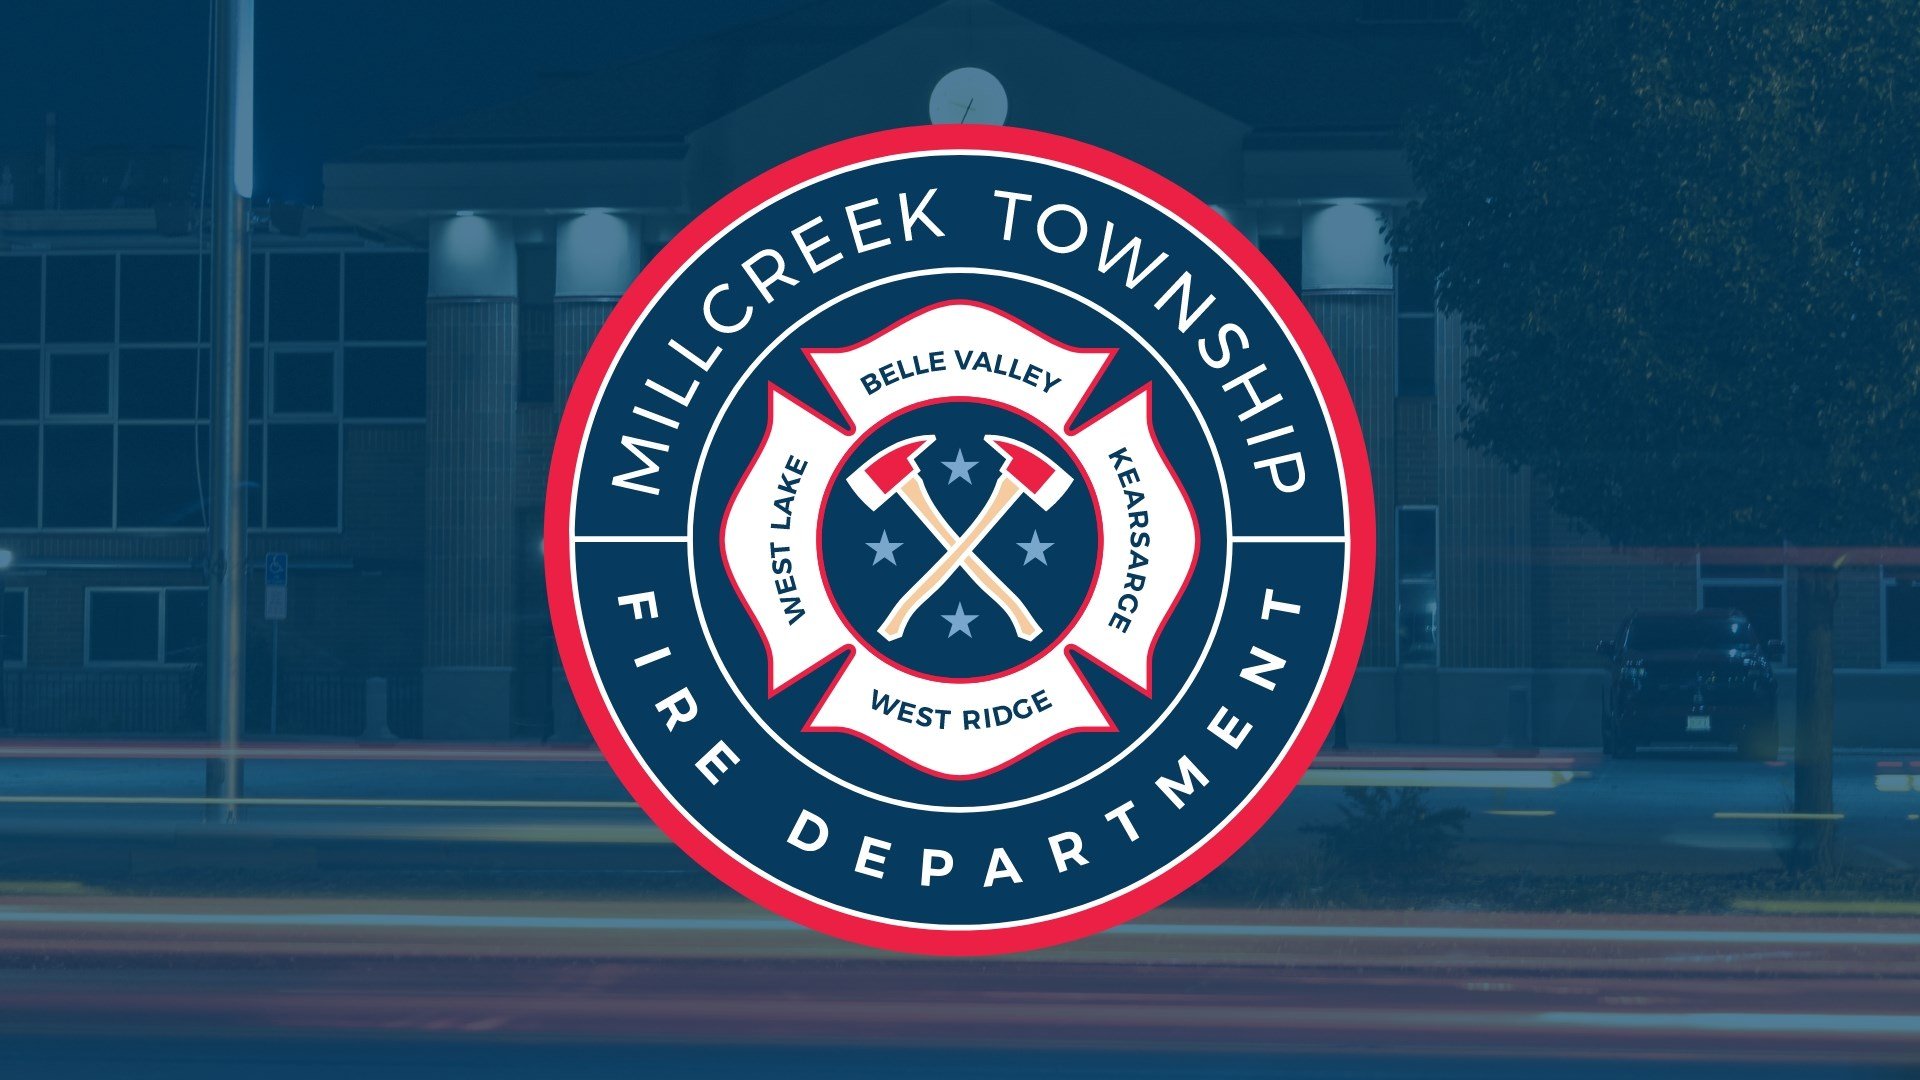 Millcreek Township to Swear in 21 New Part-Time Firefighters